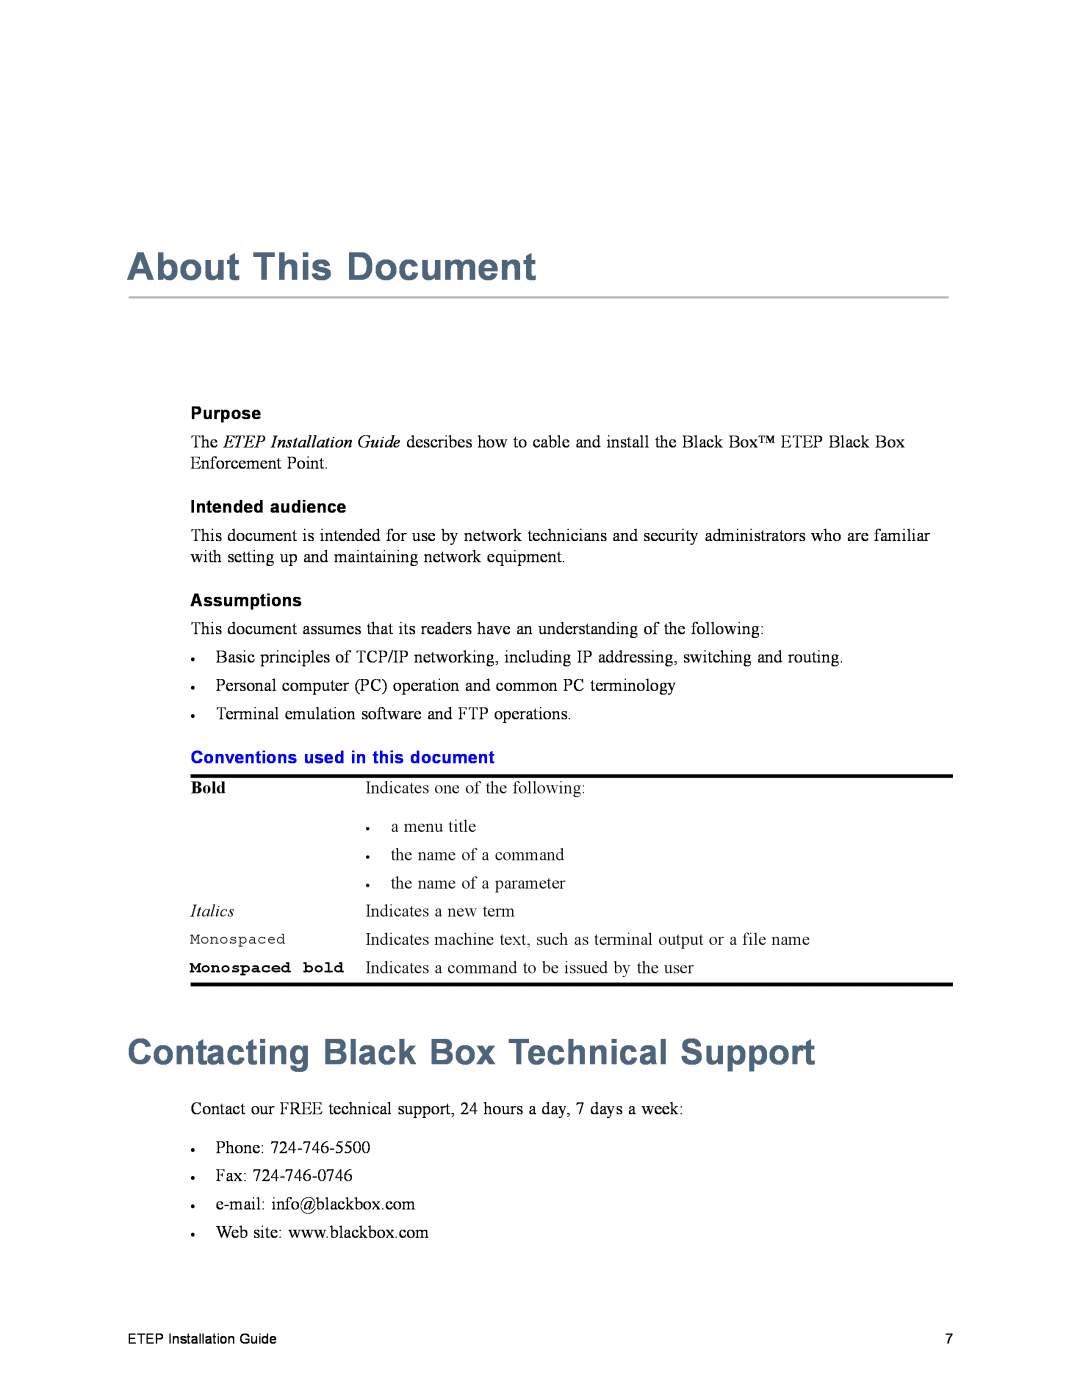 Black Box ET0100A About This Document, Contacting Black Box Technical Support, Purpose, Intended audience, Assumptions 